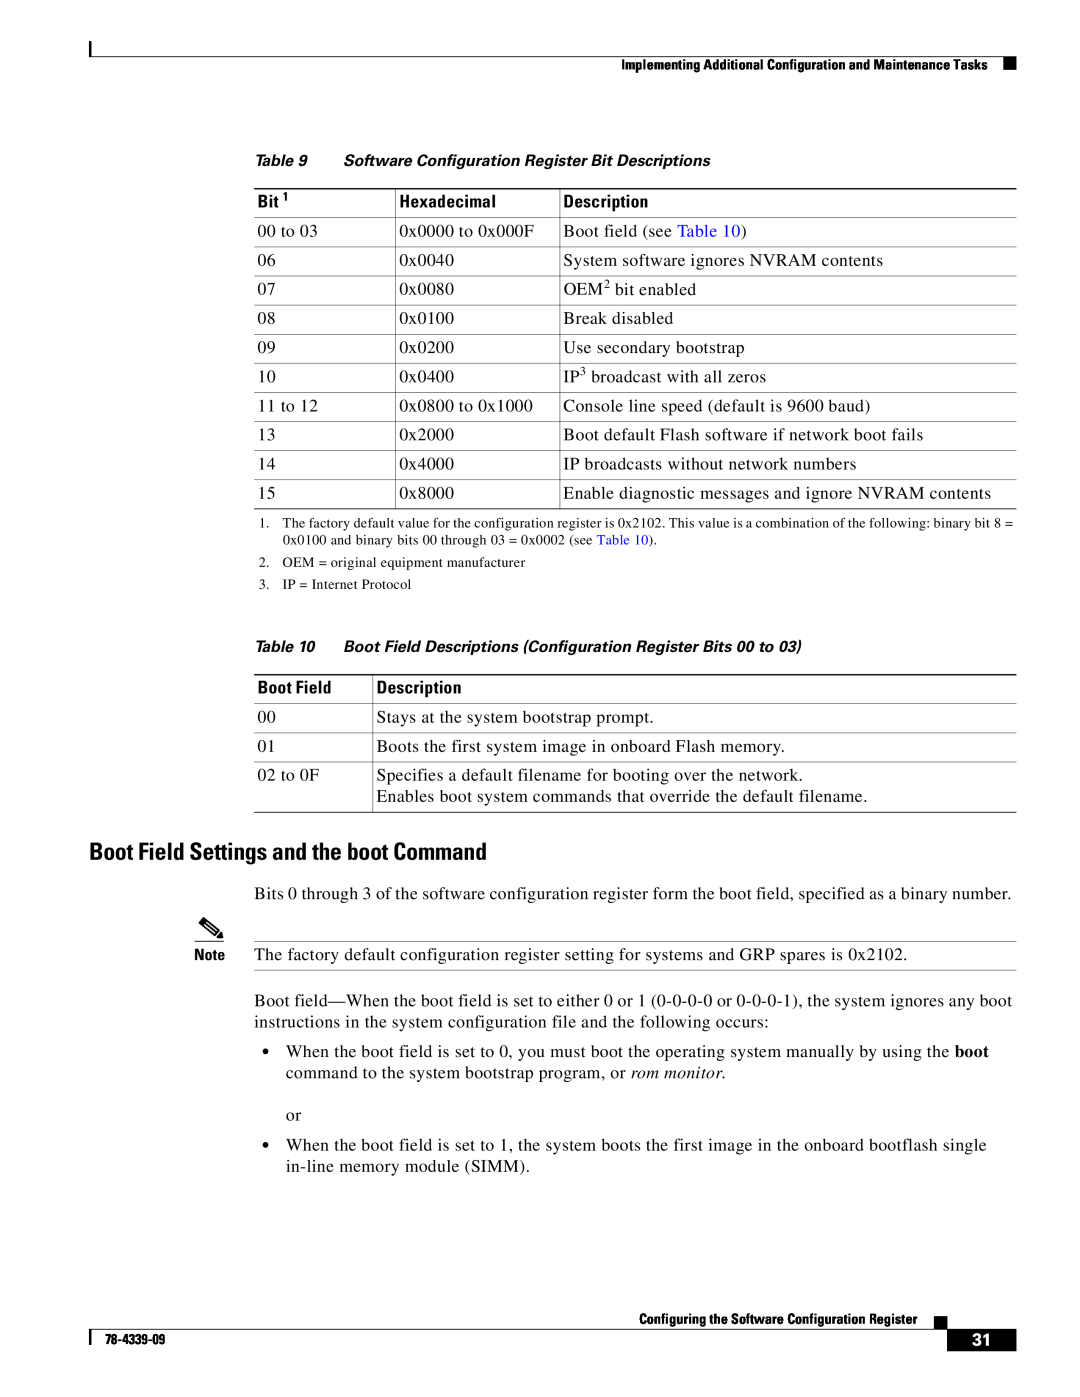 Cisco Systems GRP-B manual Boot Field Settings and the boot Command 